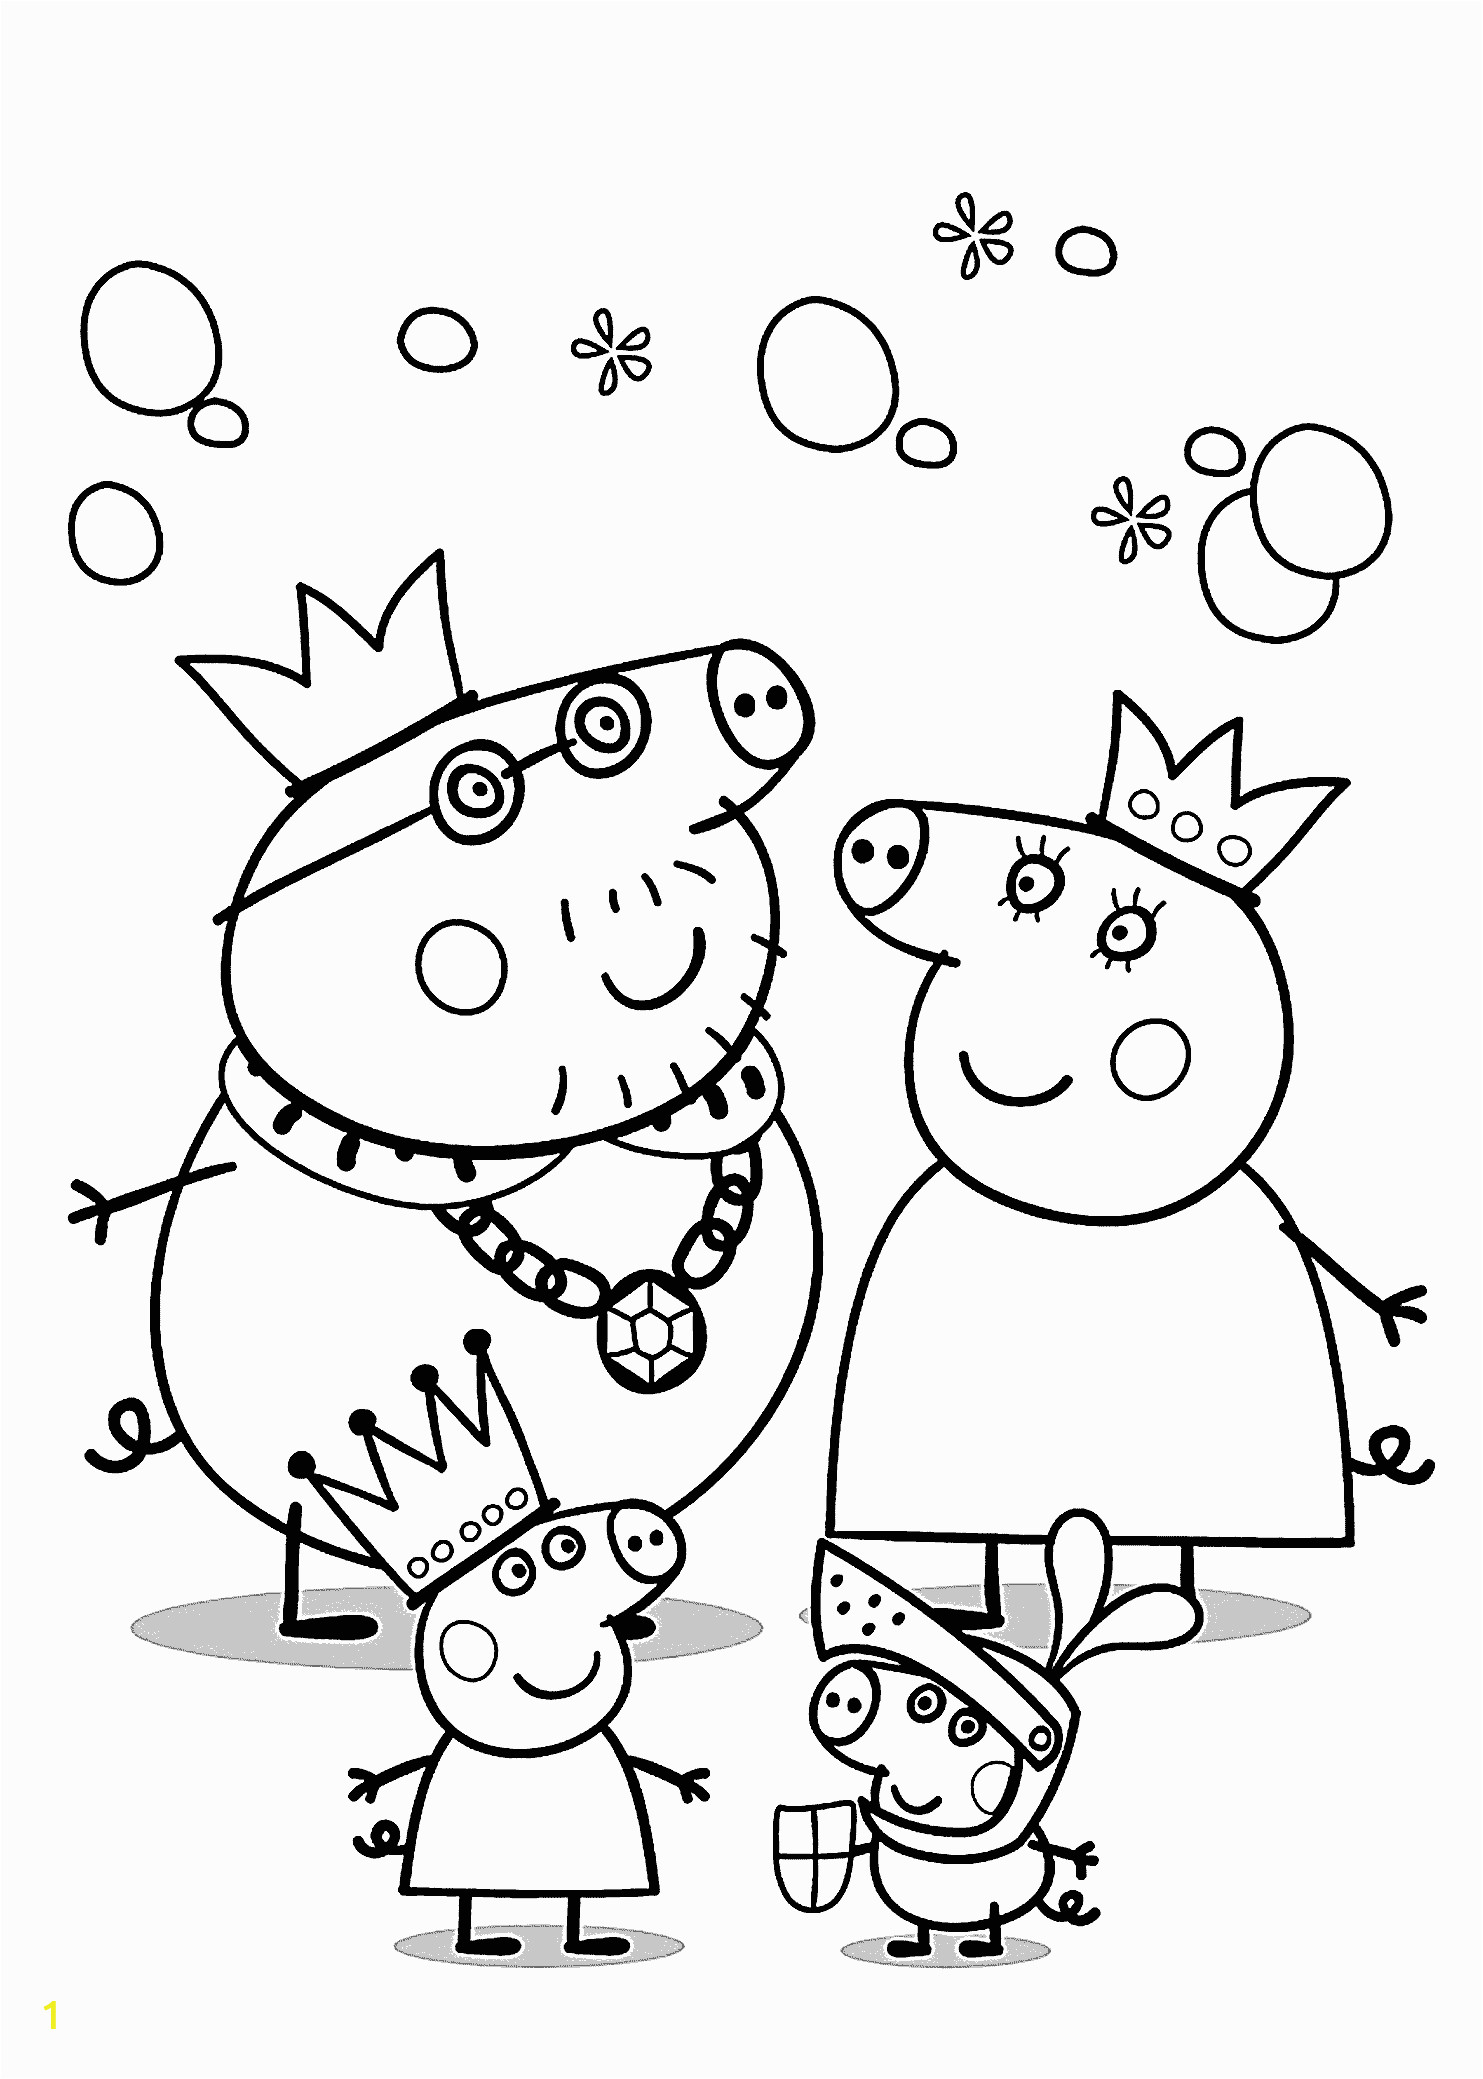 Coloring Pages Peppa Pig Printable Peppa Pig Coloring Pages for Kids Printable Free